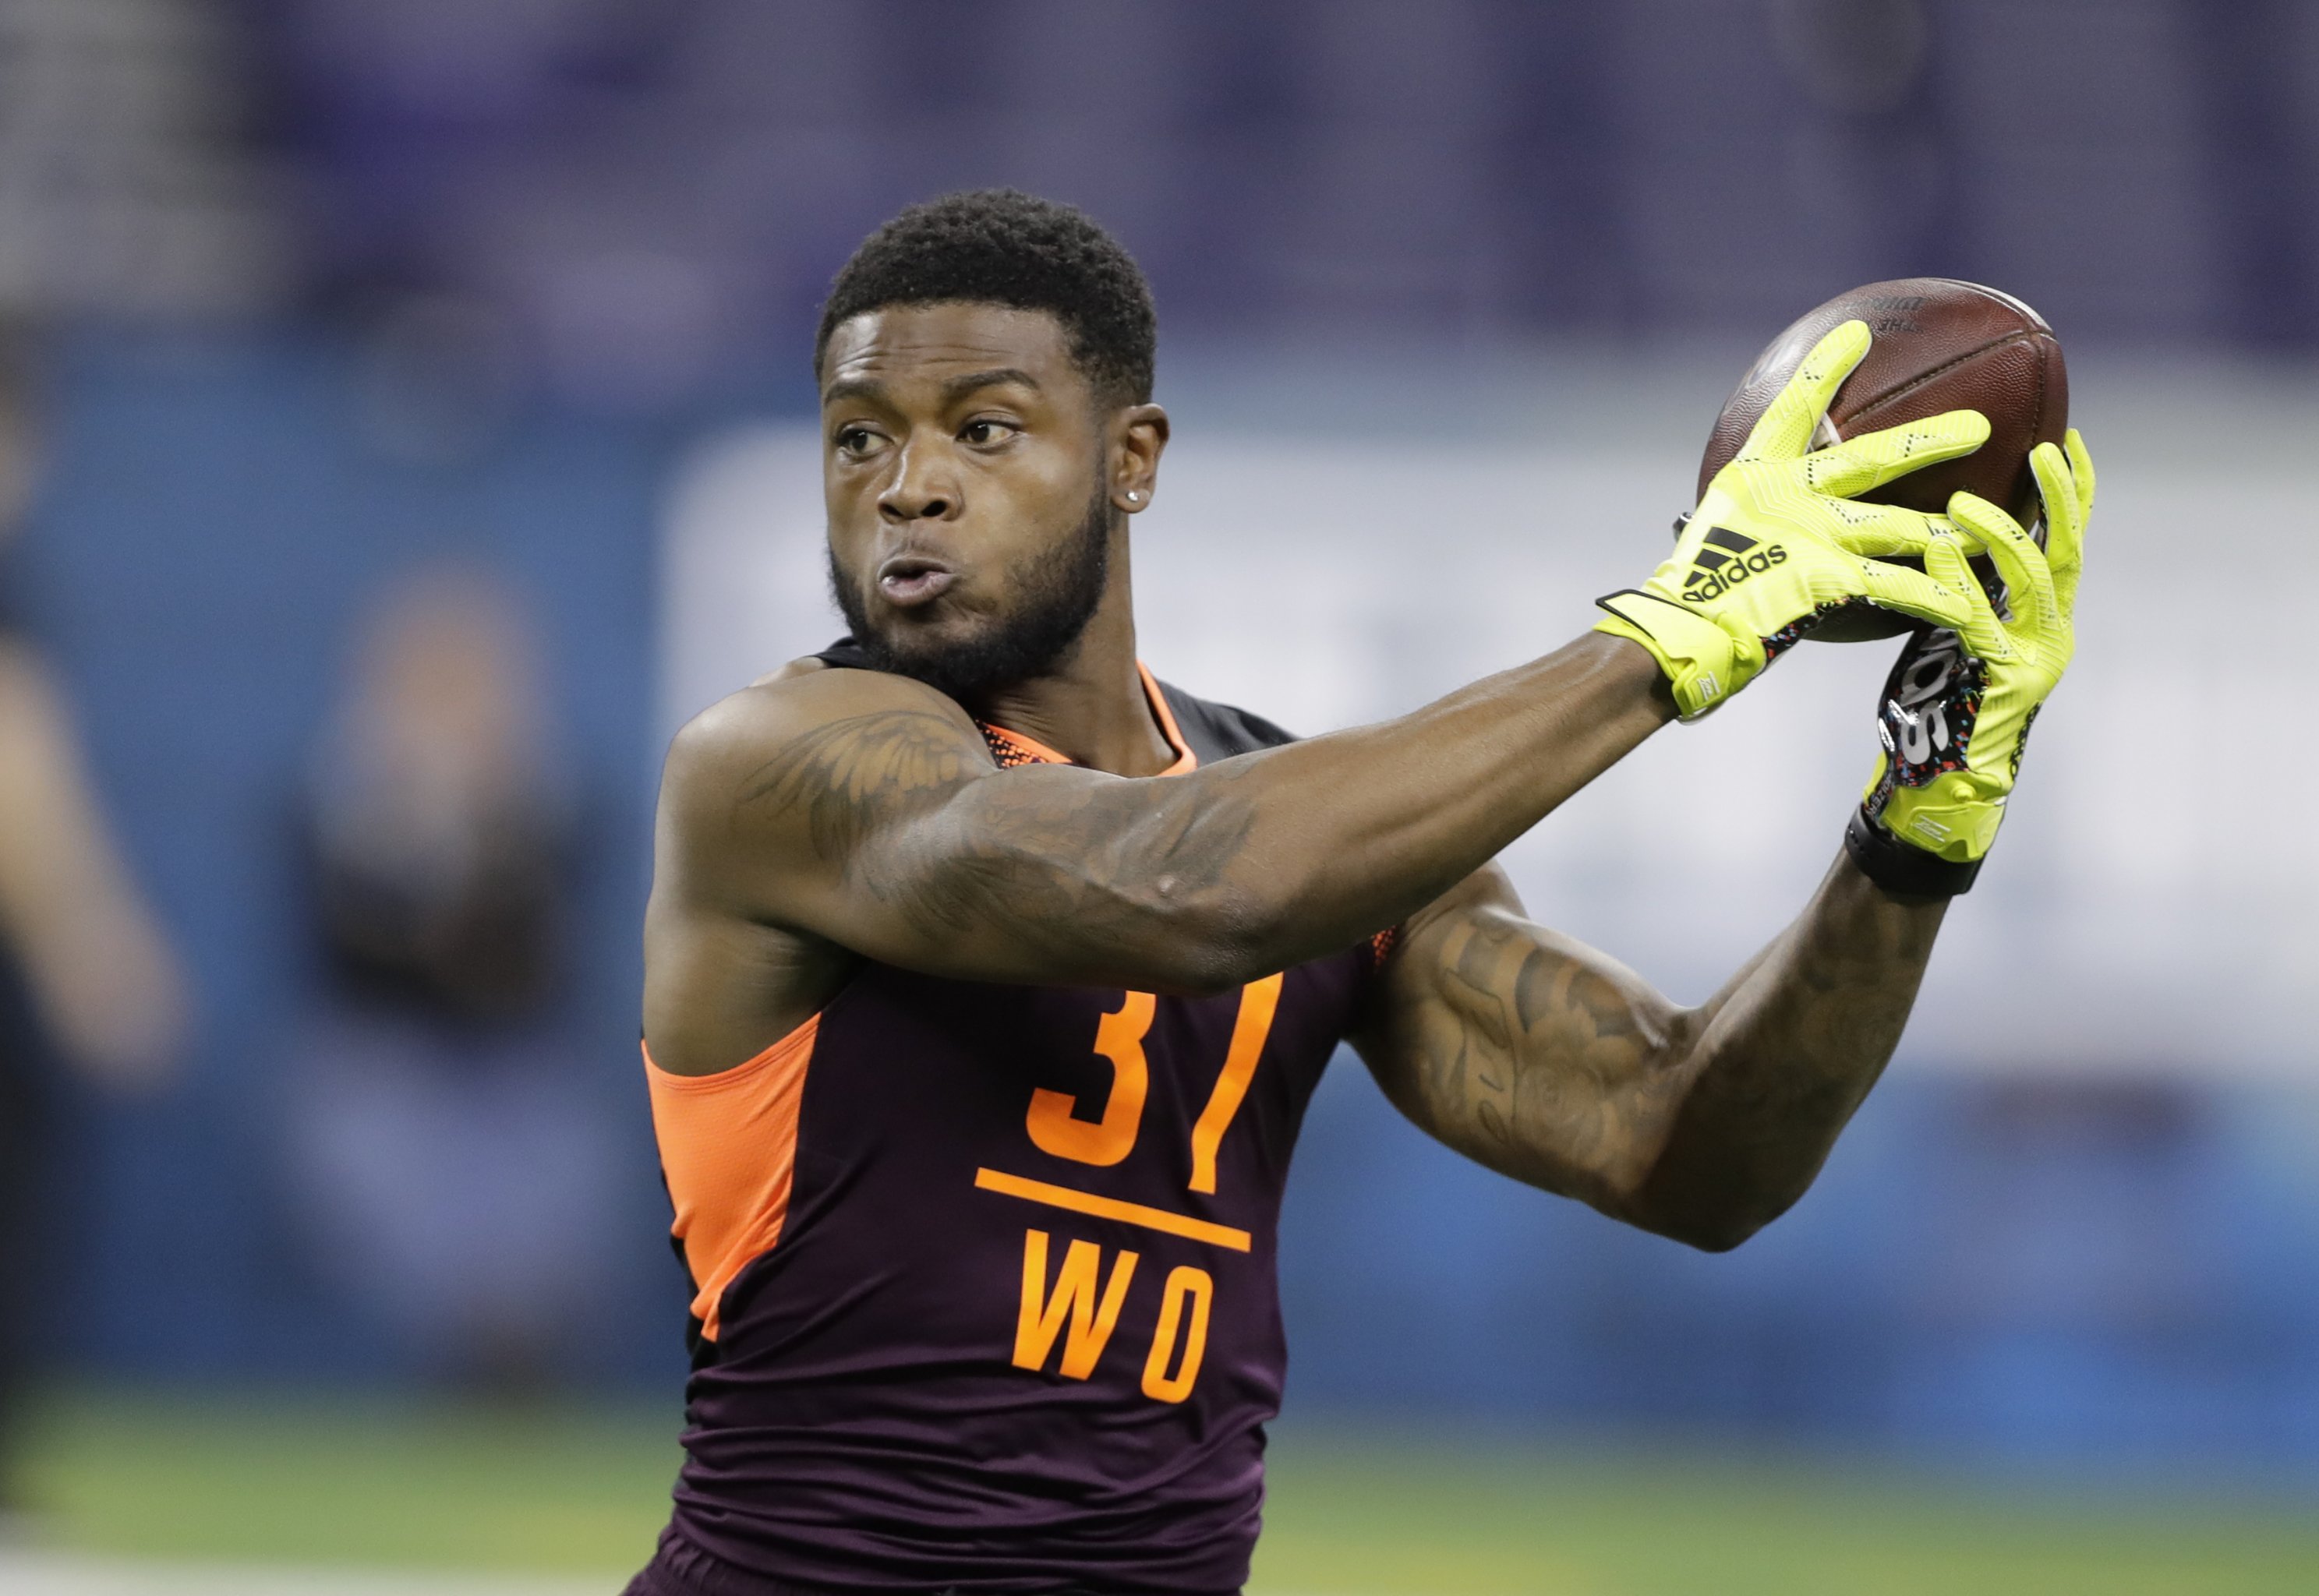 Nfl Draft 400 Ranking The Drafts Top Wide Receivers